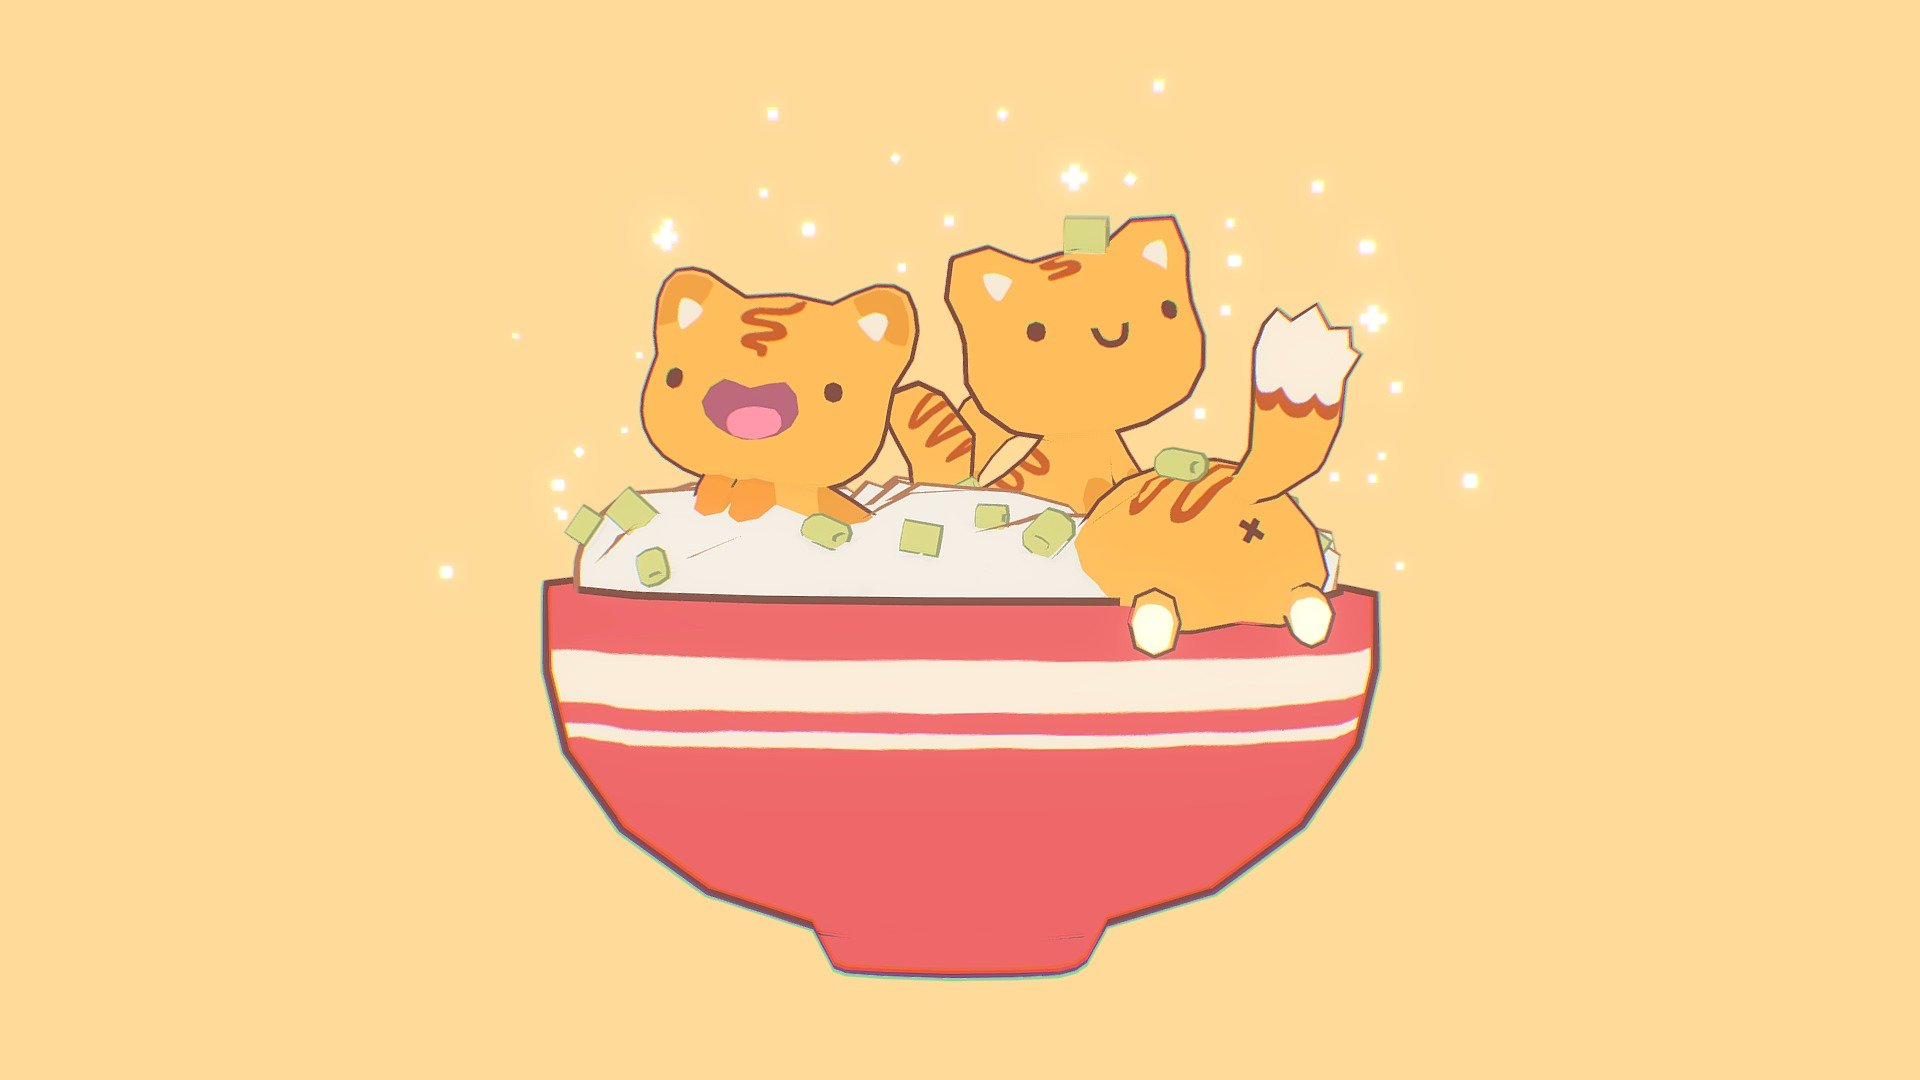 This is another 3D model based on the amazing artwork of FableFire! Katsudon is definetely my favorite japanese dish and I'm a huge cat lover, specially oranges one's like Xexela (my fat cat), so I couldn't look at these cute kittens and not think about making my 3D version of it! This became my favorite 3d work so far and I really hope that you like and enjoy it too! ♥

Art by FableFire: https://www.instagram.com/p/B1G2sMwF2W1/

Polycount: 2765 faces, 5490 tris 3d model